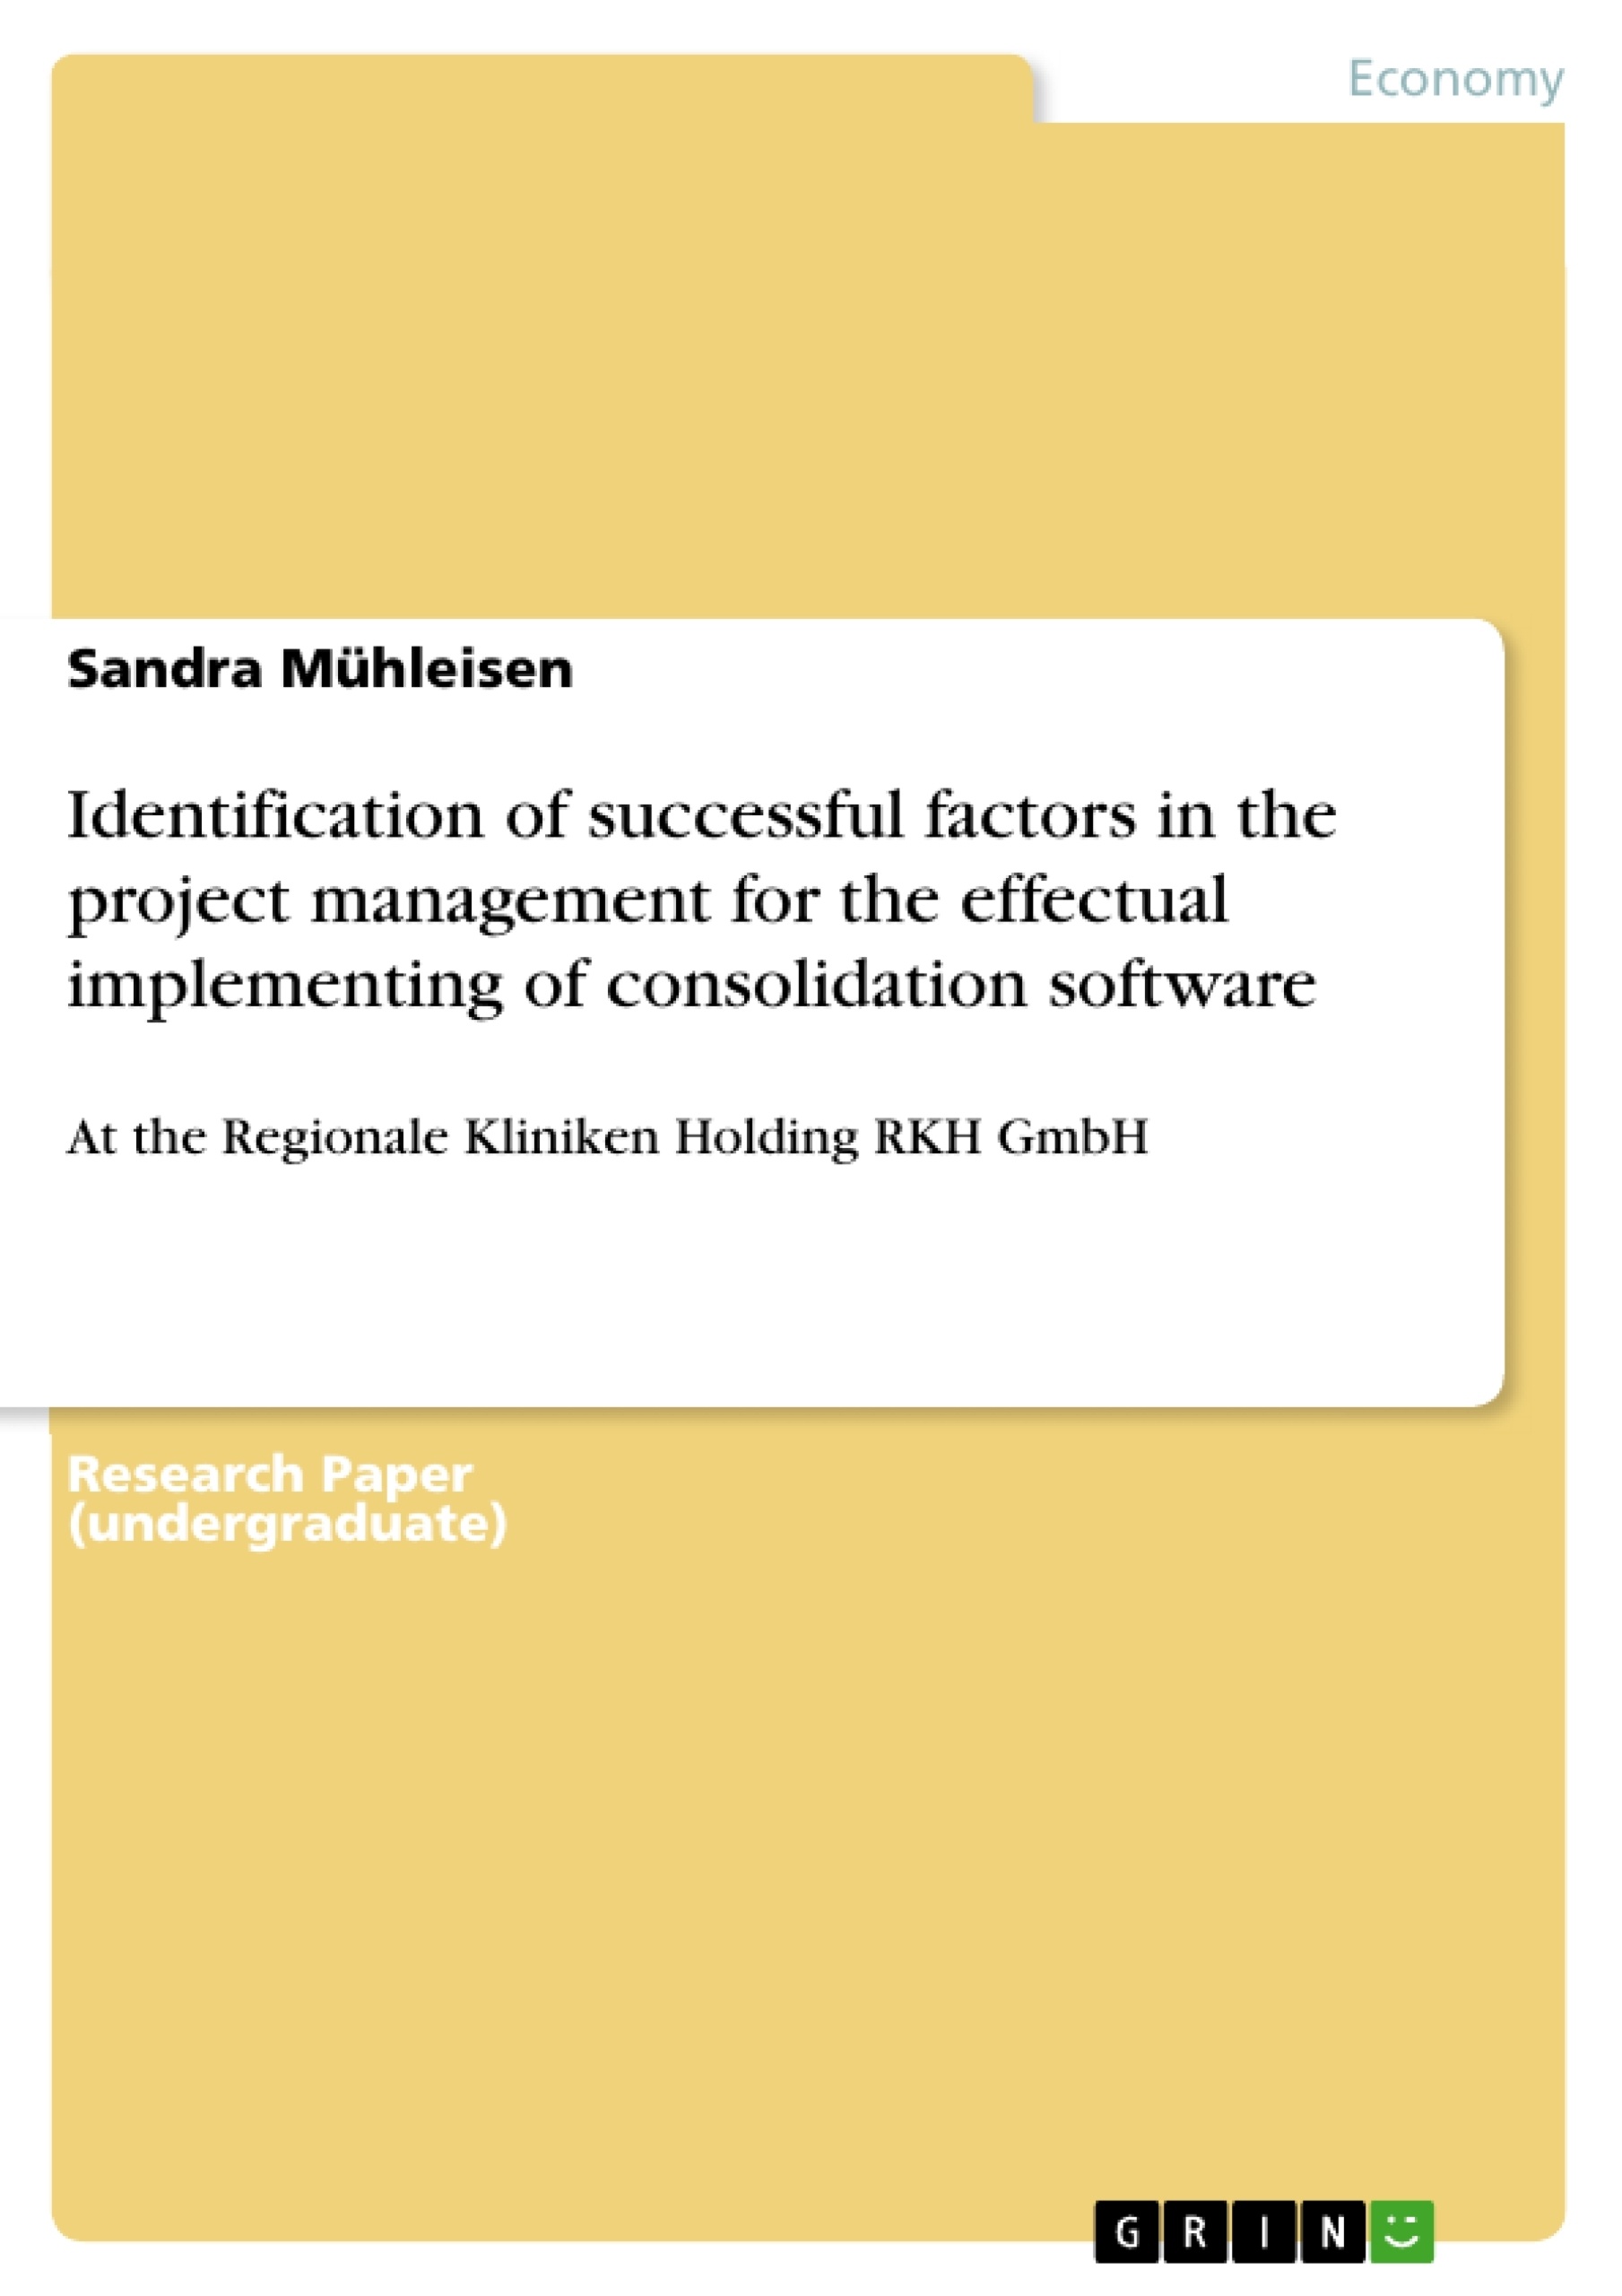 Título: Identification of successful factors in the project management for the effectual implementing of consolidation software